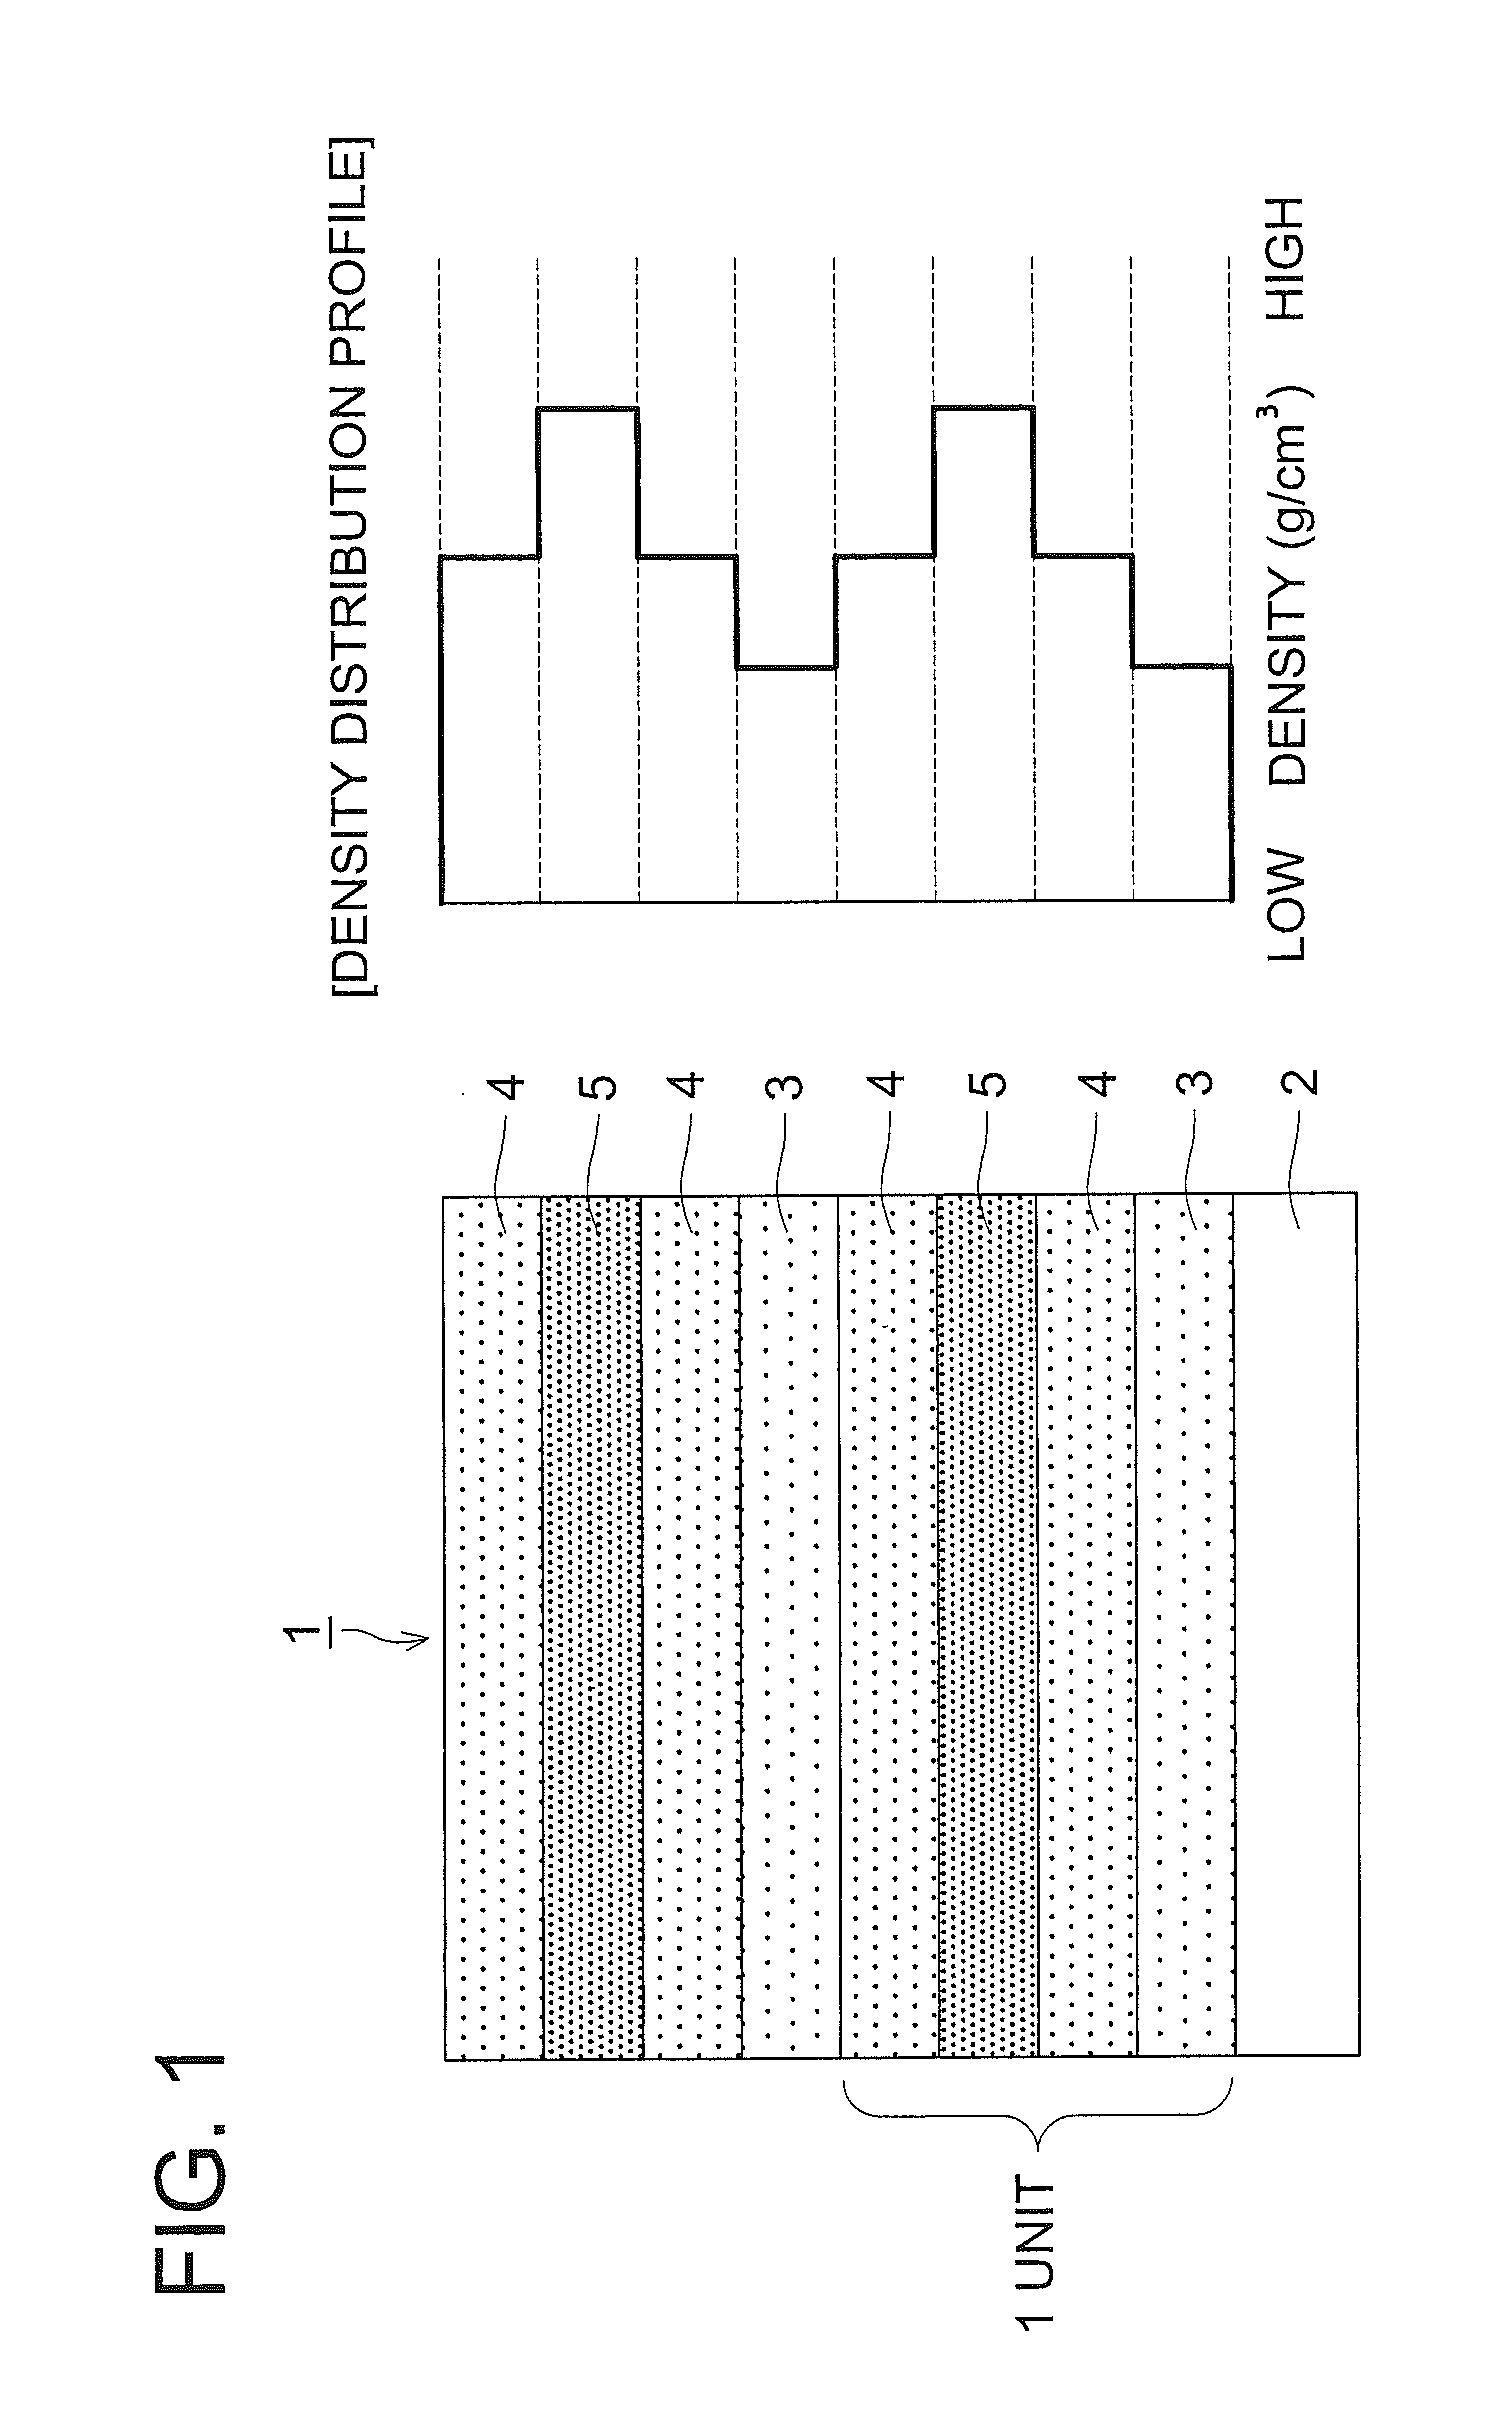 Organic electroluminescence element, display device and lighting device